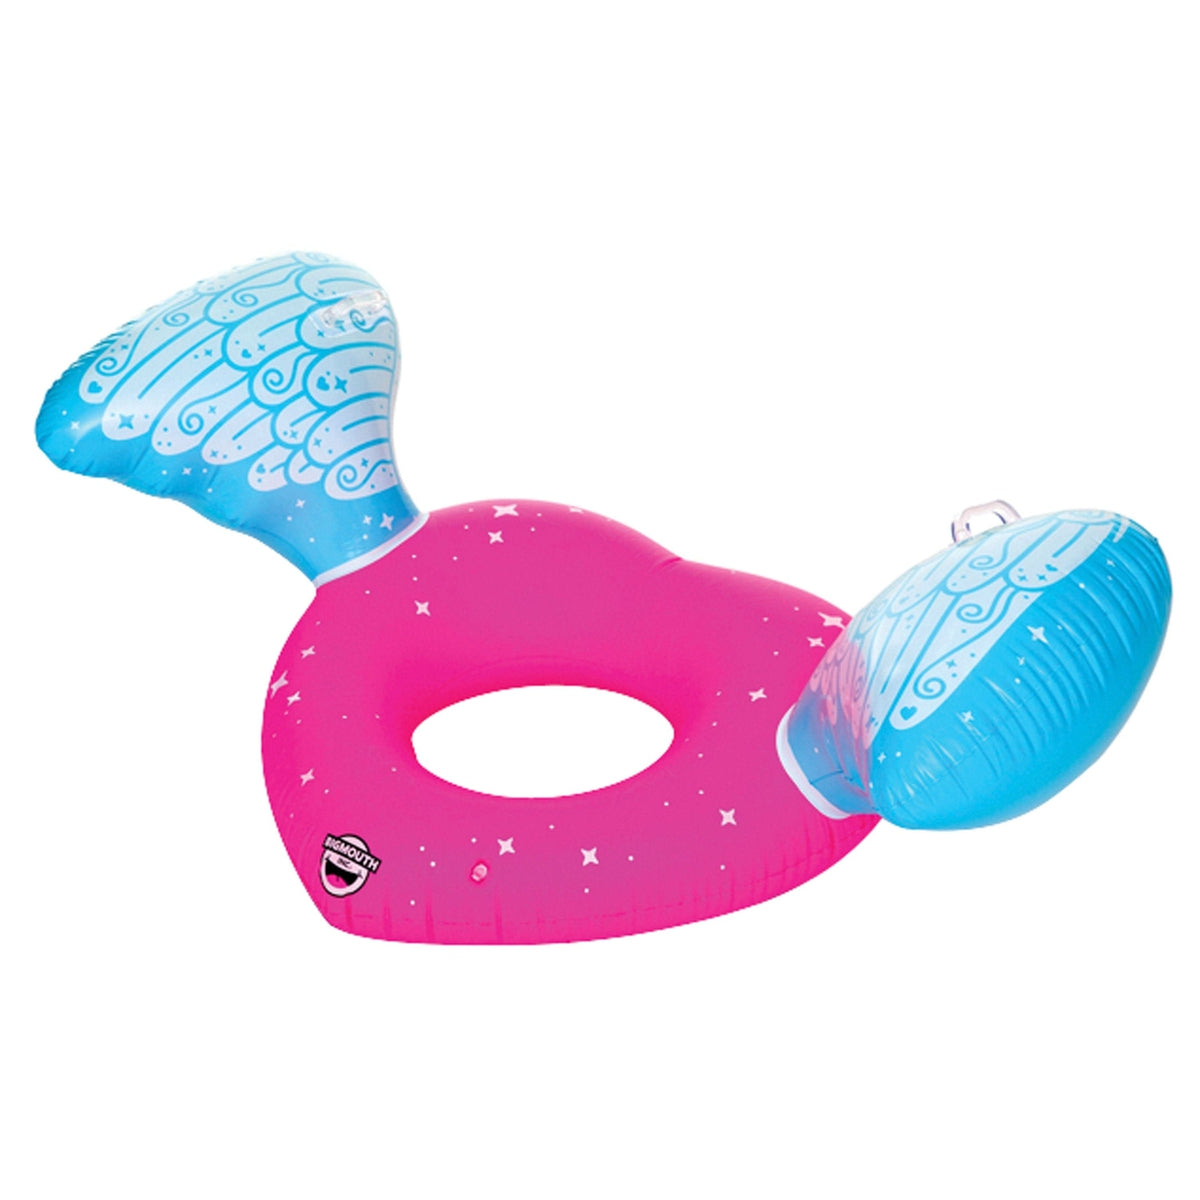 BigMouth Qualifies for Free Shipping BigMouth Inflatable Kiddo Angel Heart Pool Float #BMKF-0002